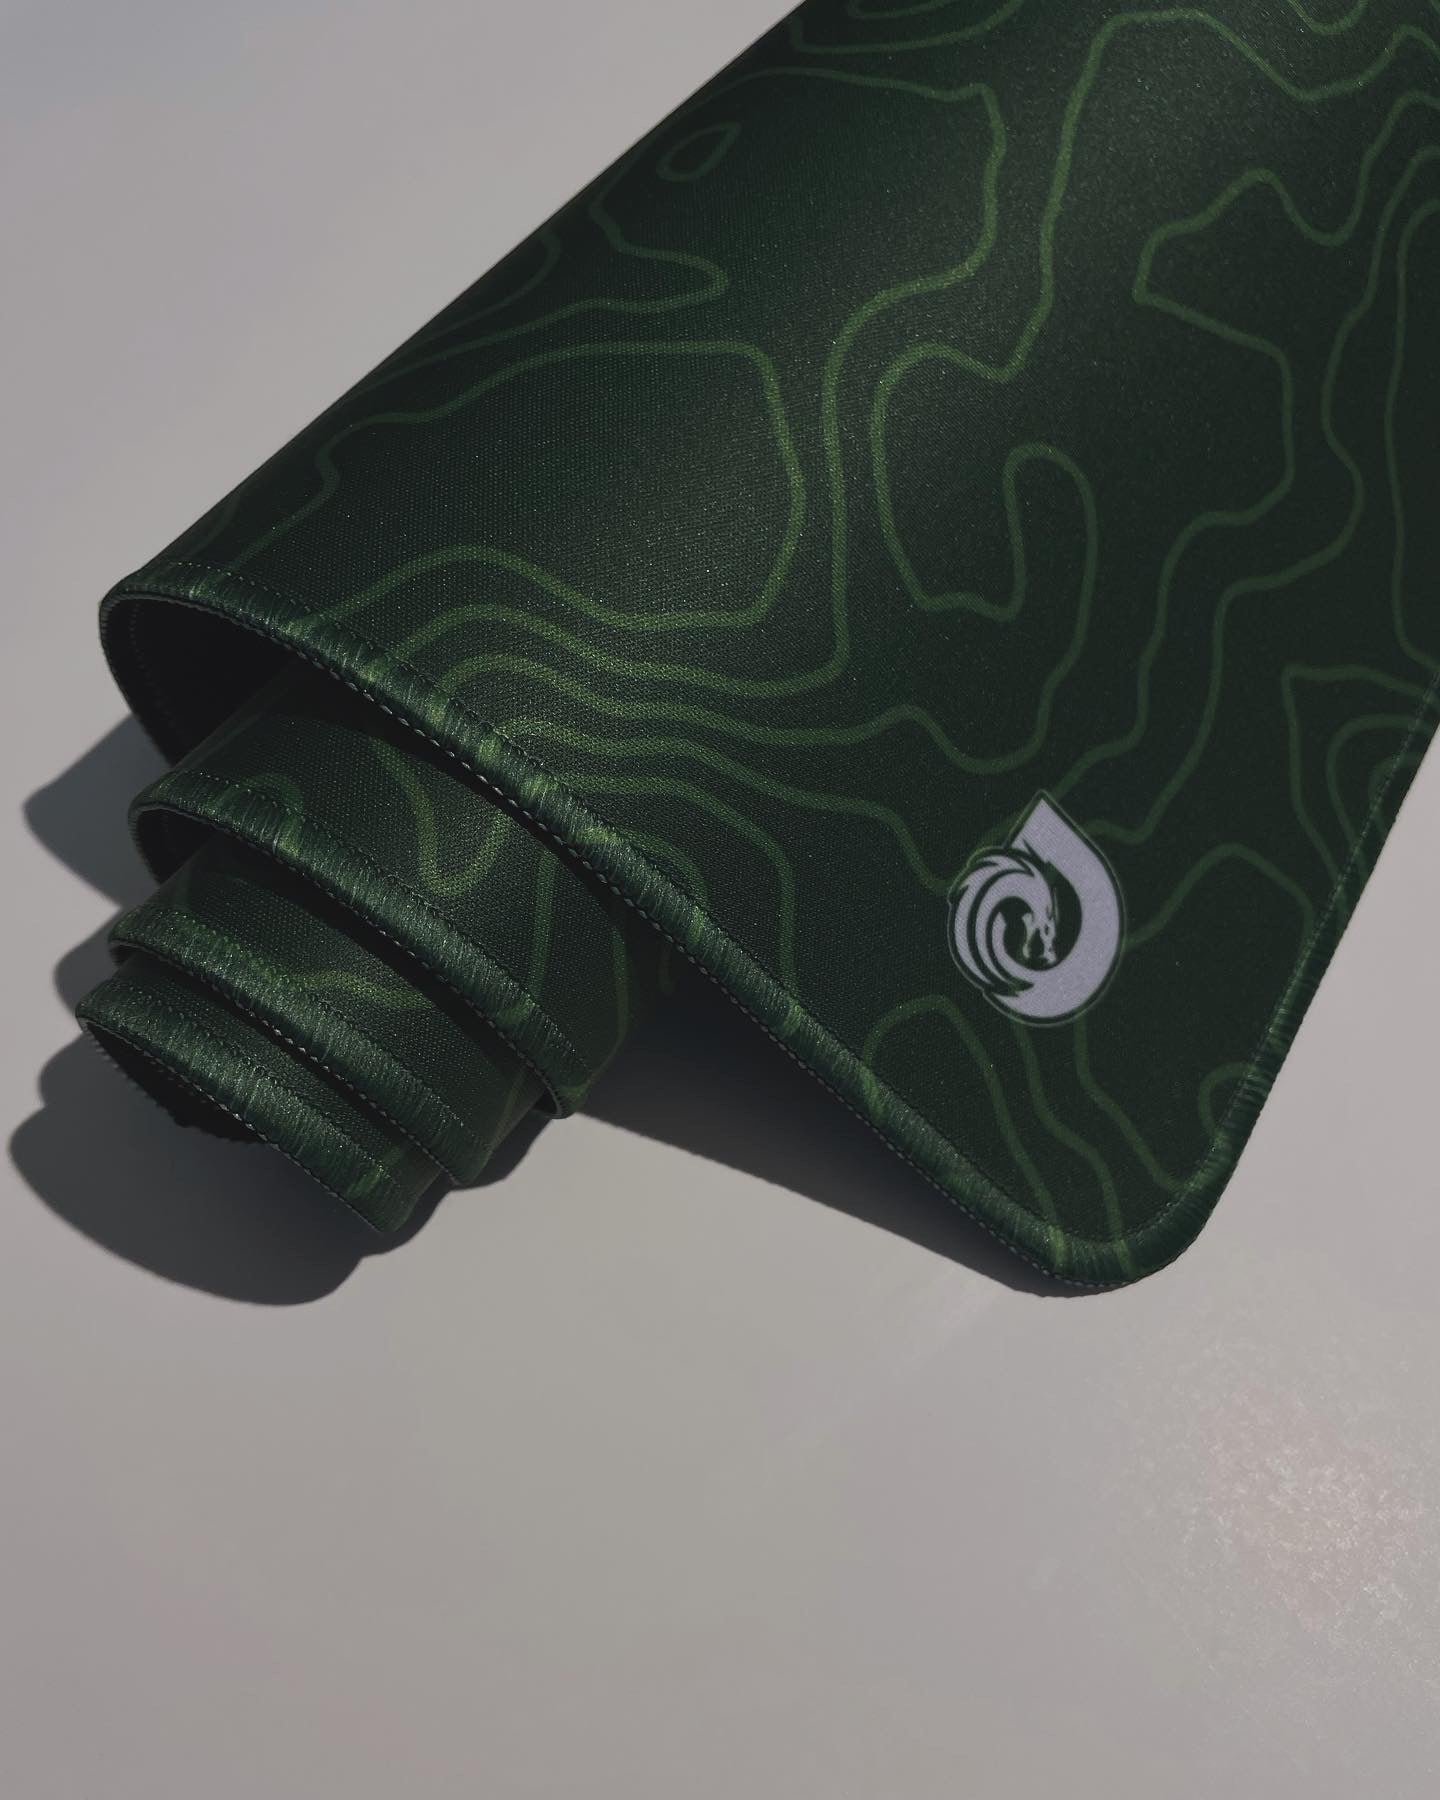 Large Gaming Mouse Pad - Green